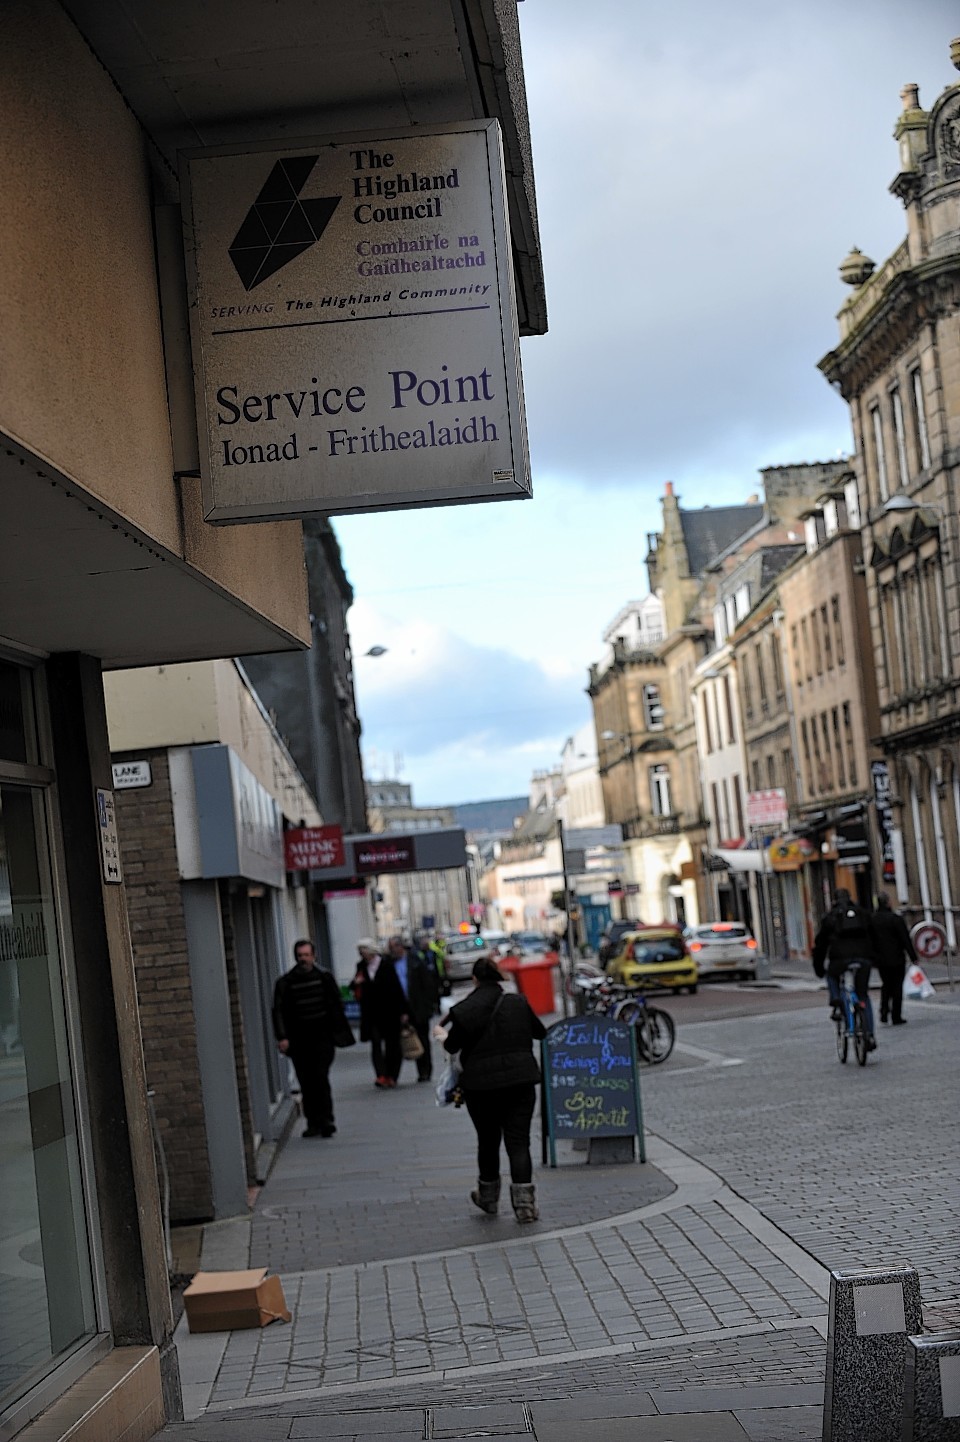 Inverness Service Point will be one of 13 main contact centres for Highland Council services